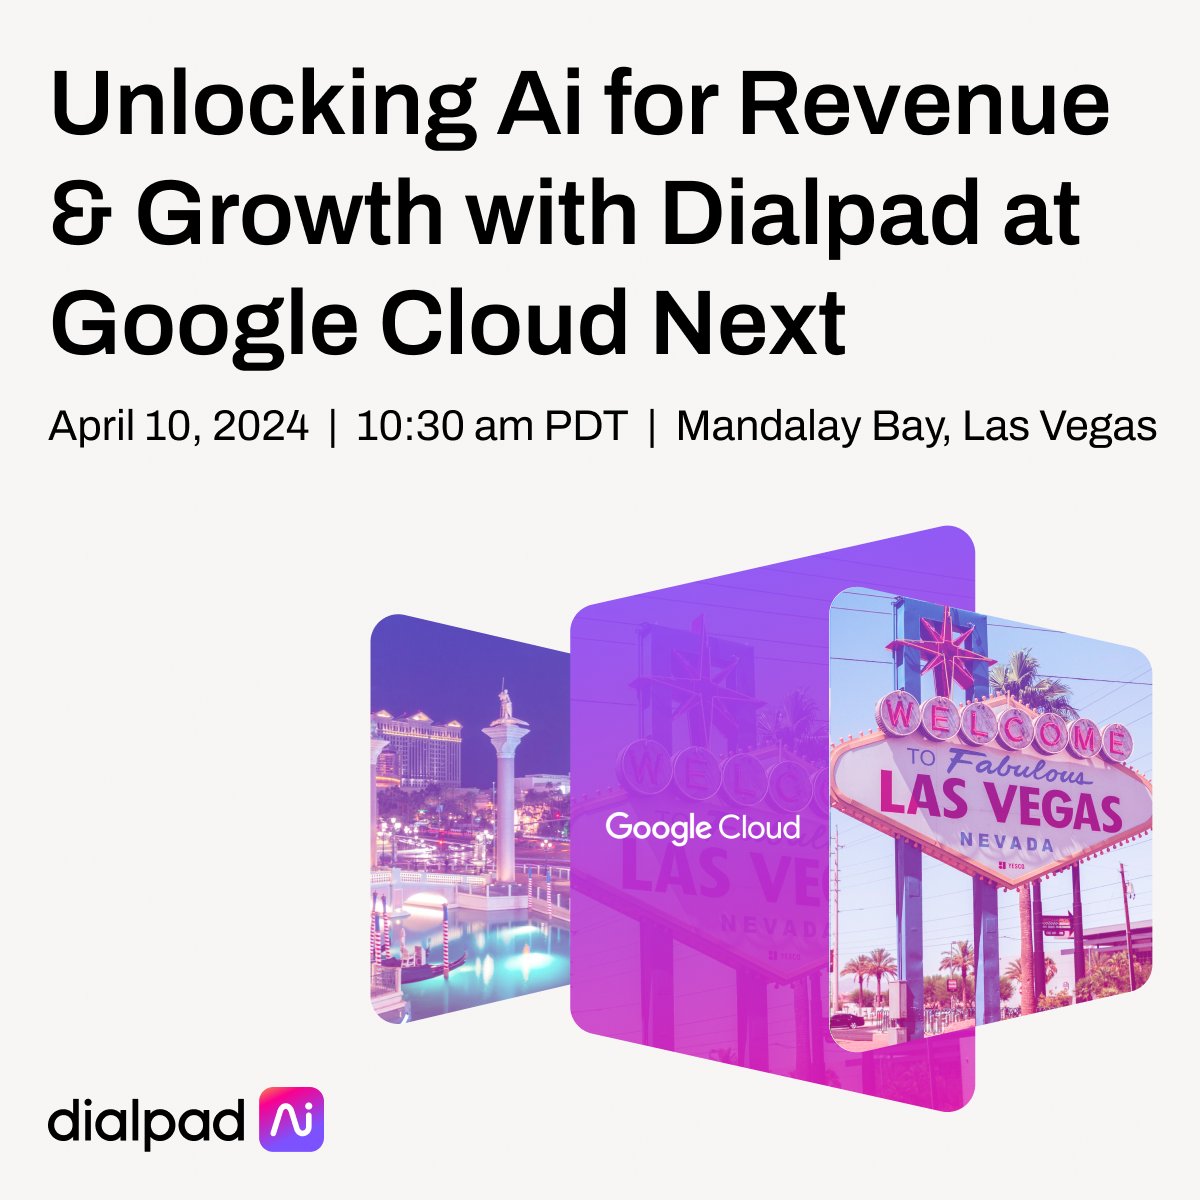 ✨ Time is now! This week, @Dialpad takes centre stage at #GoogleCloudNext. We have four enlightening discussions on schedule, including a special one from our very own Founder and CEO, @cwalker123. Haven't registered yet? Join us here: bit.ly/4anHB8k